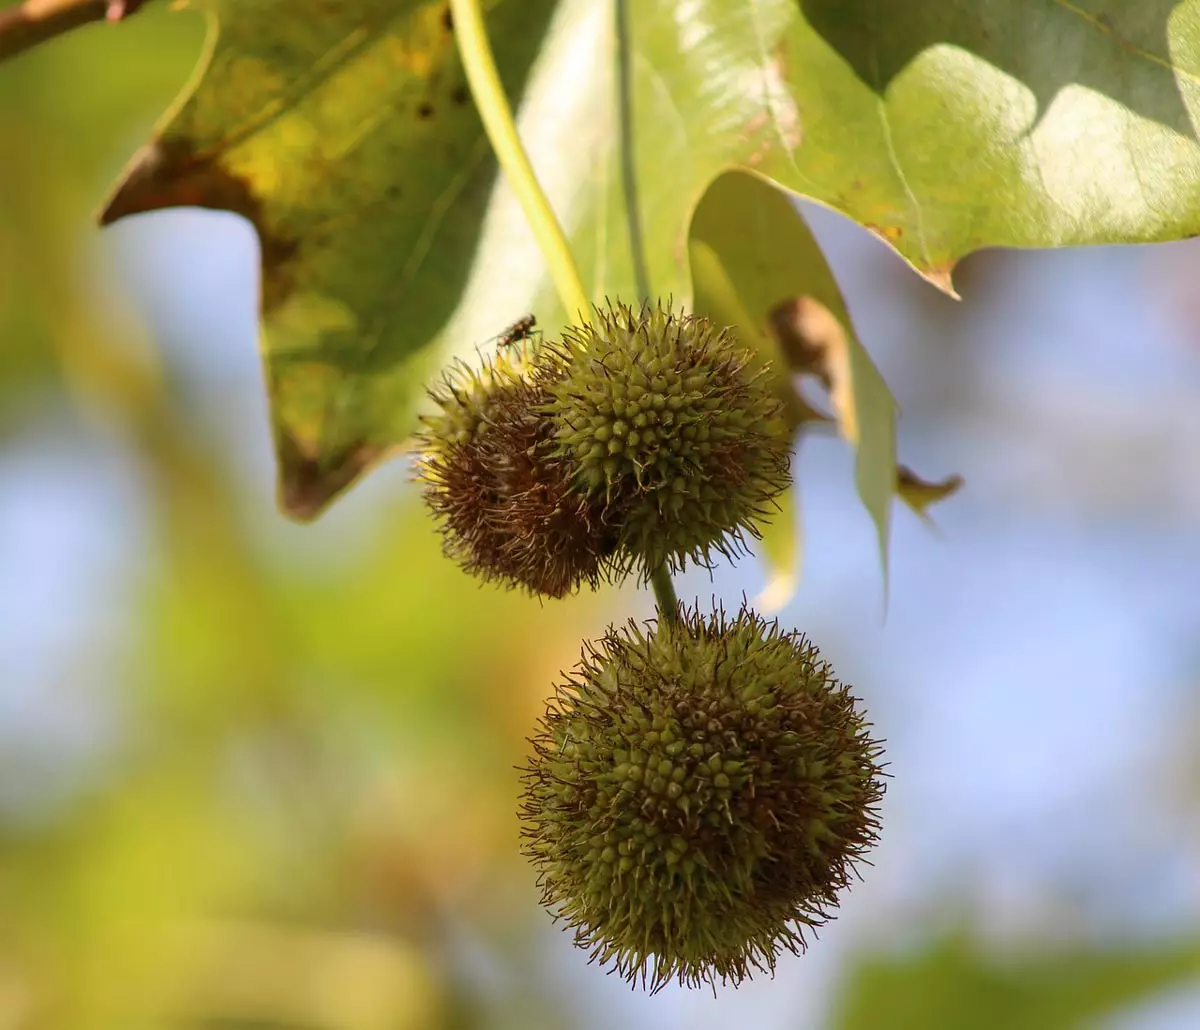 American Sycamore fruit